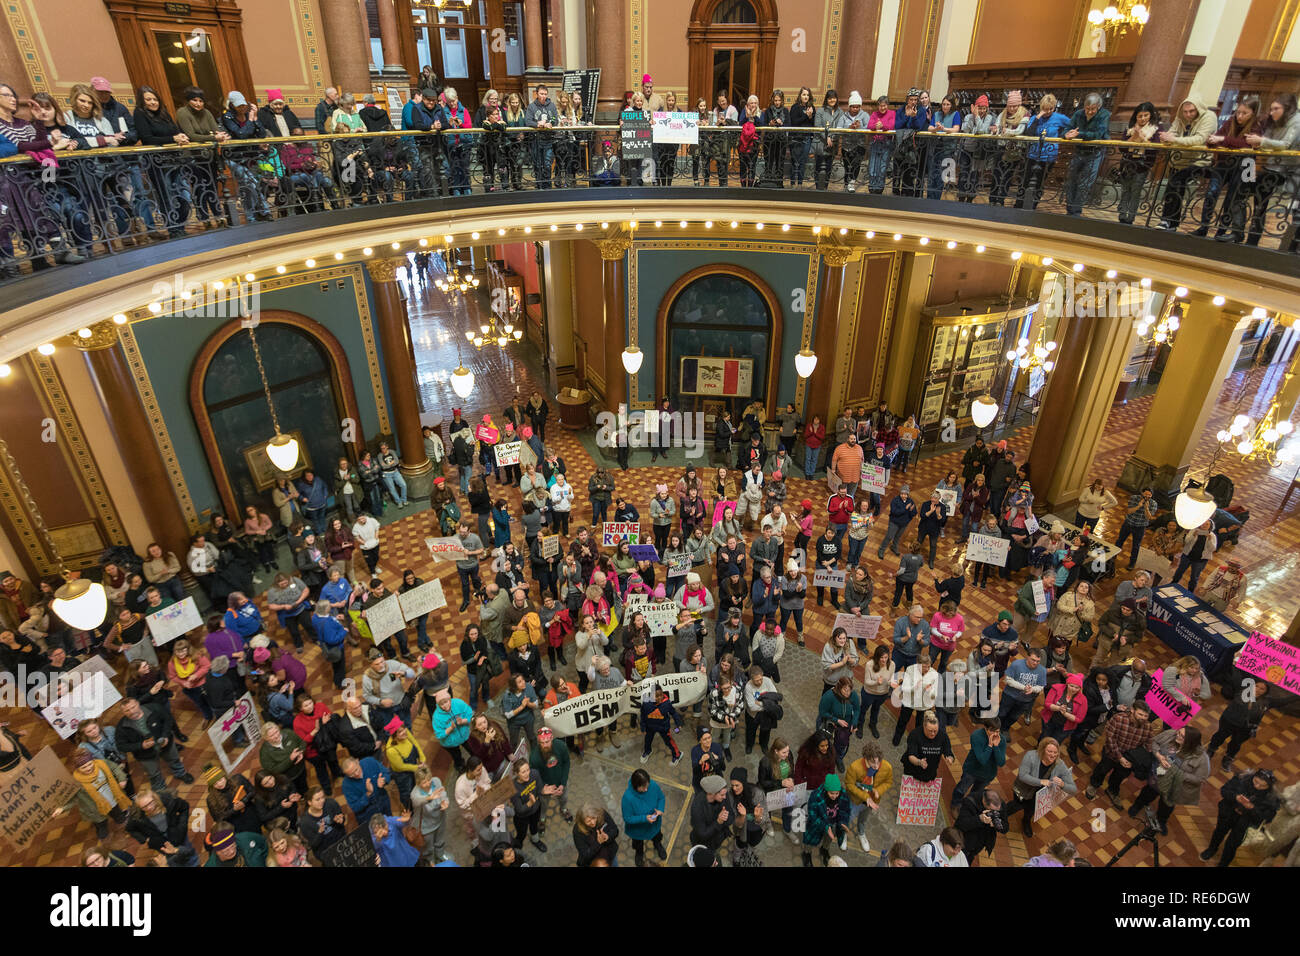 Des Moines, Iowa, USA. 19th January, 2019. Because of severe weather and extreme cold the 3rd annual Women’s March was held inside the state capitol in Des Moines on Saturday. Several hundred people participated in the event. Credit: Keith Turrill/Alamy Live News Credit: Keith Turrill/Alamy Live News Stock Photo